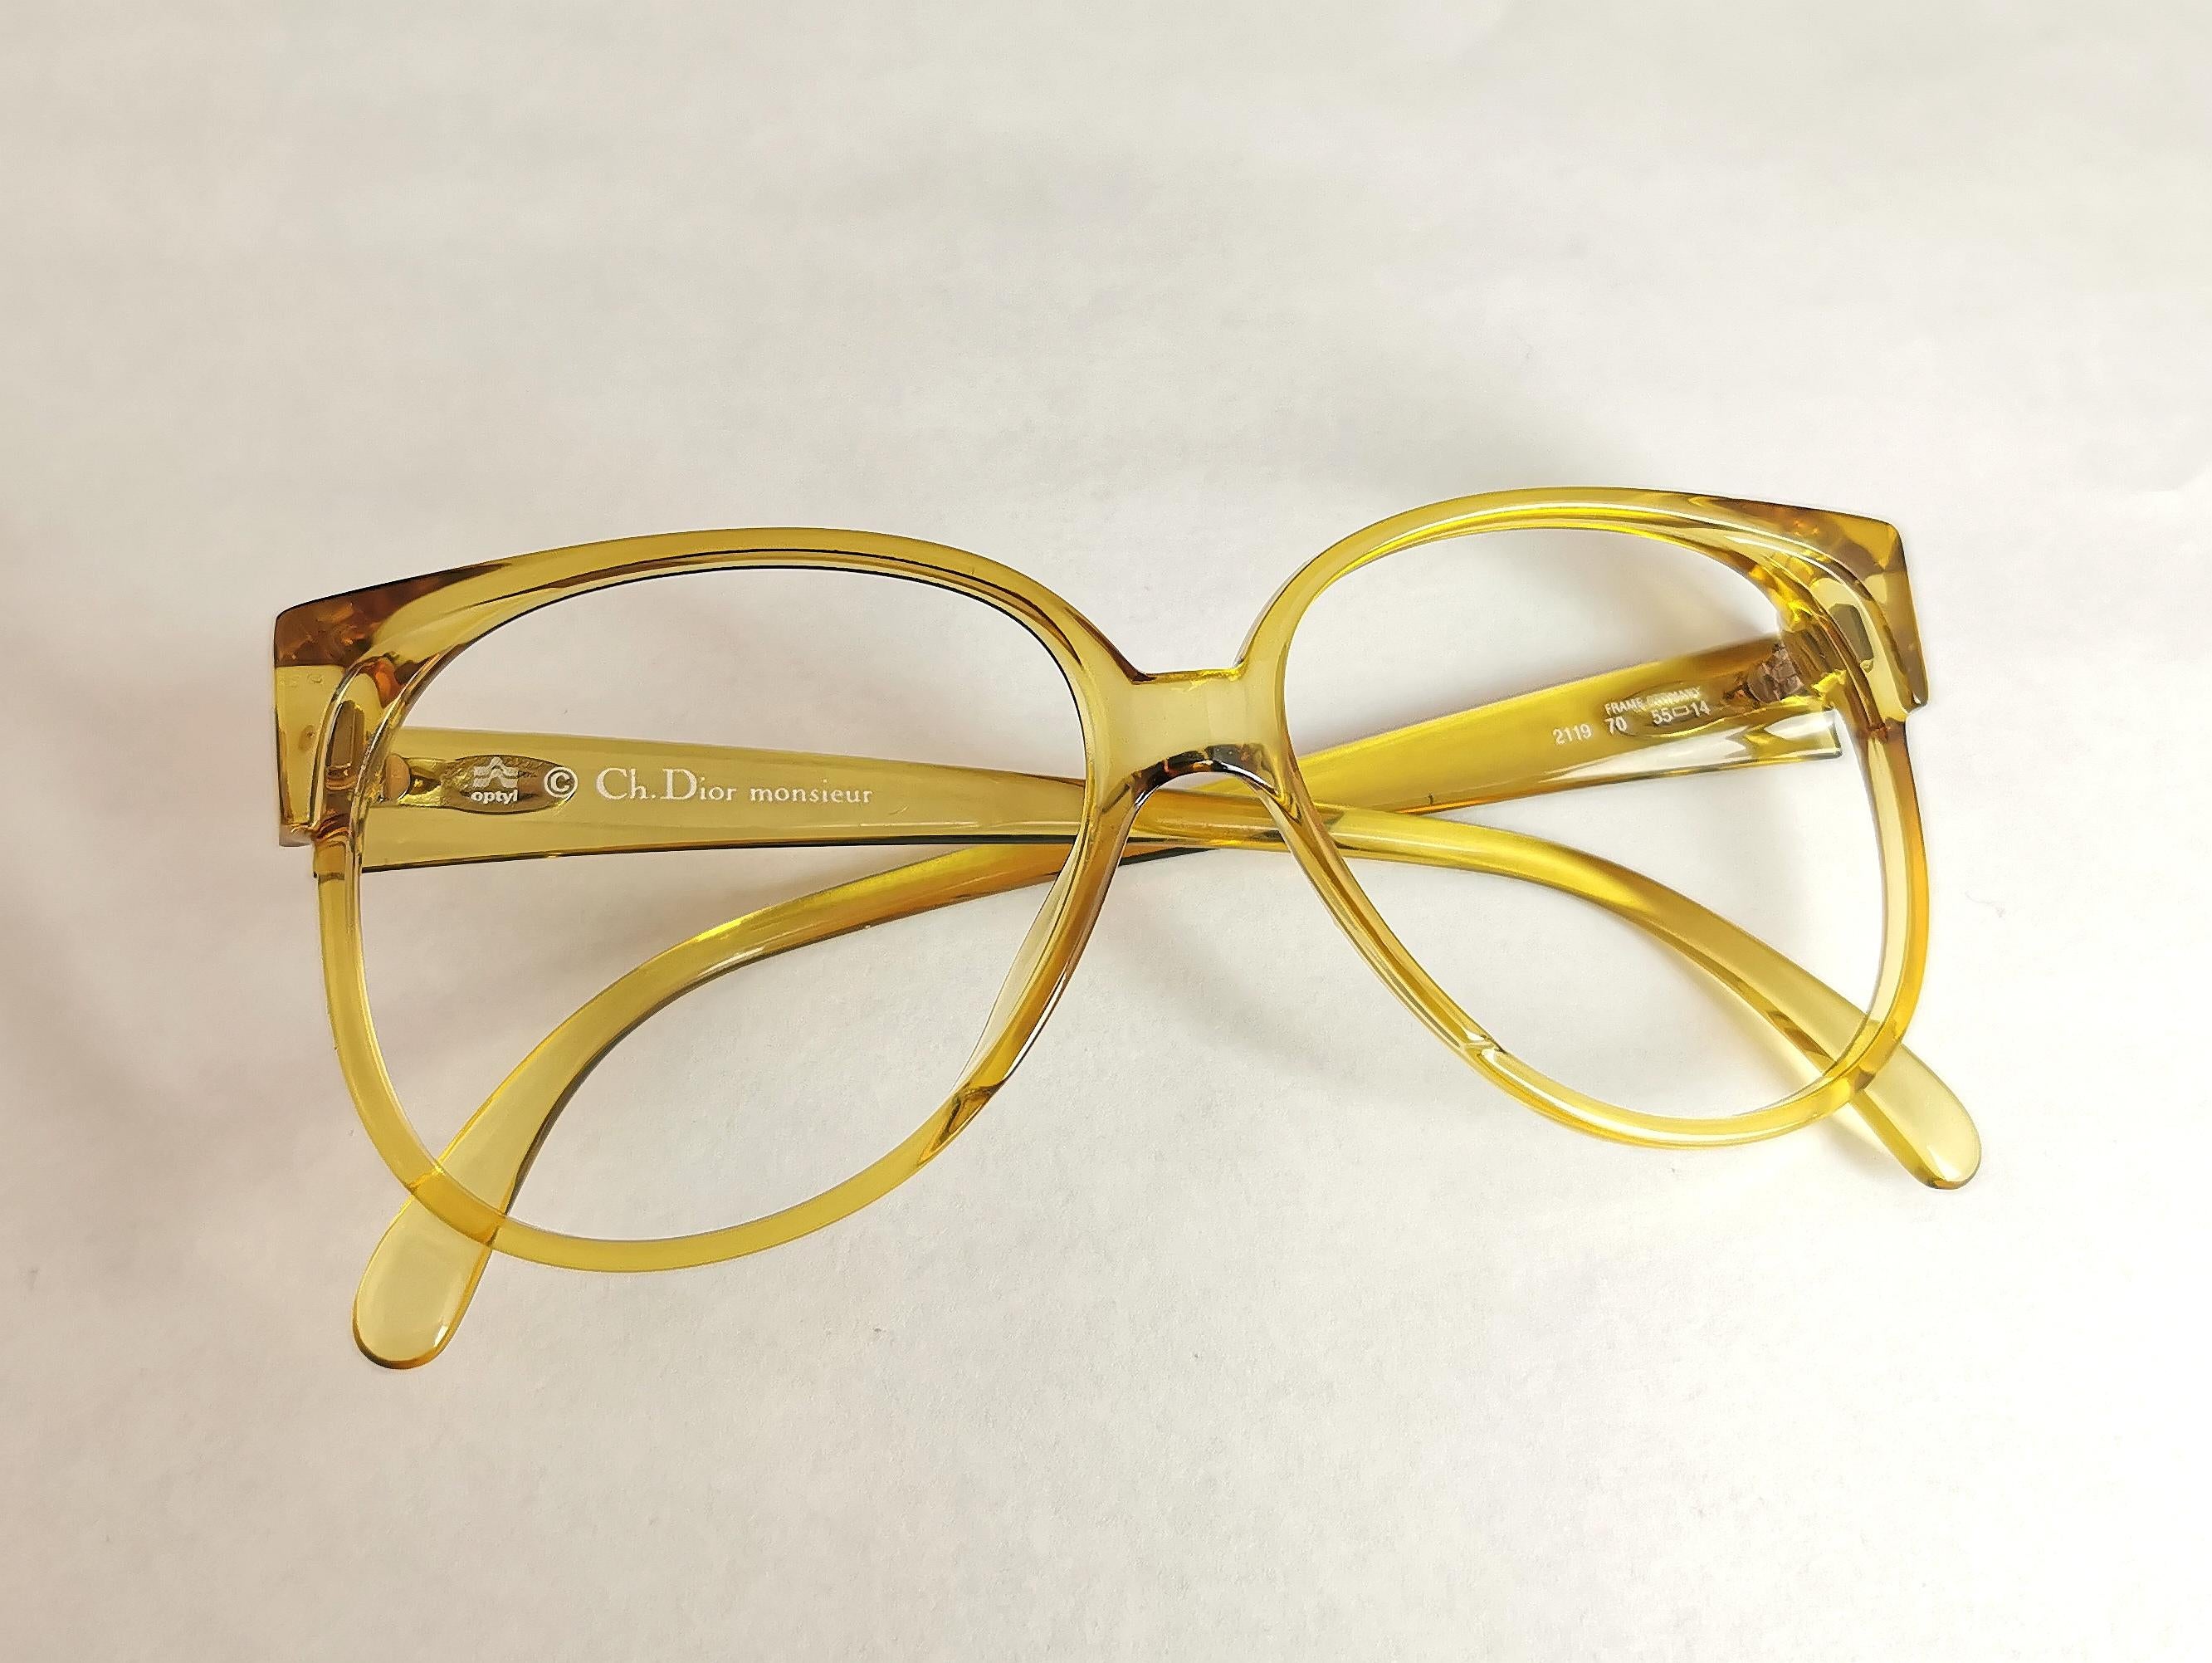 Super stylish pair of preppy Christian Dior Monsieur glasses or spectacle frames.

Large lense frames with a slightly squared shape in a retro style.

They have gradient yellow acetate frames with the branding to the hinge near the temple and